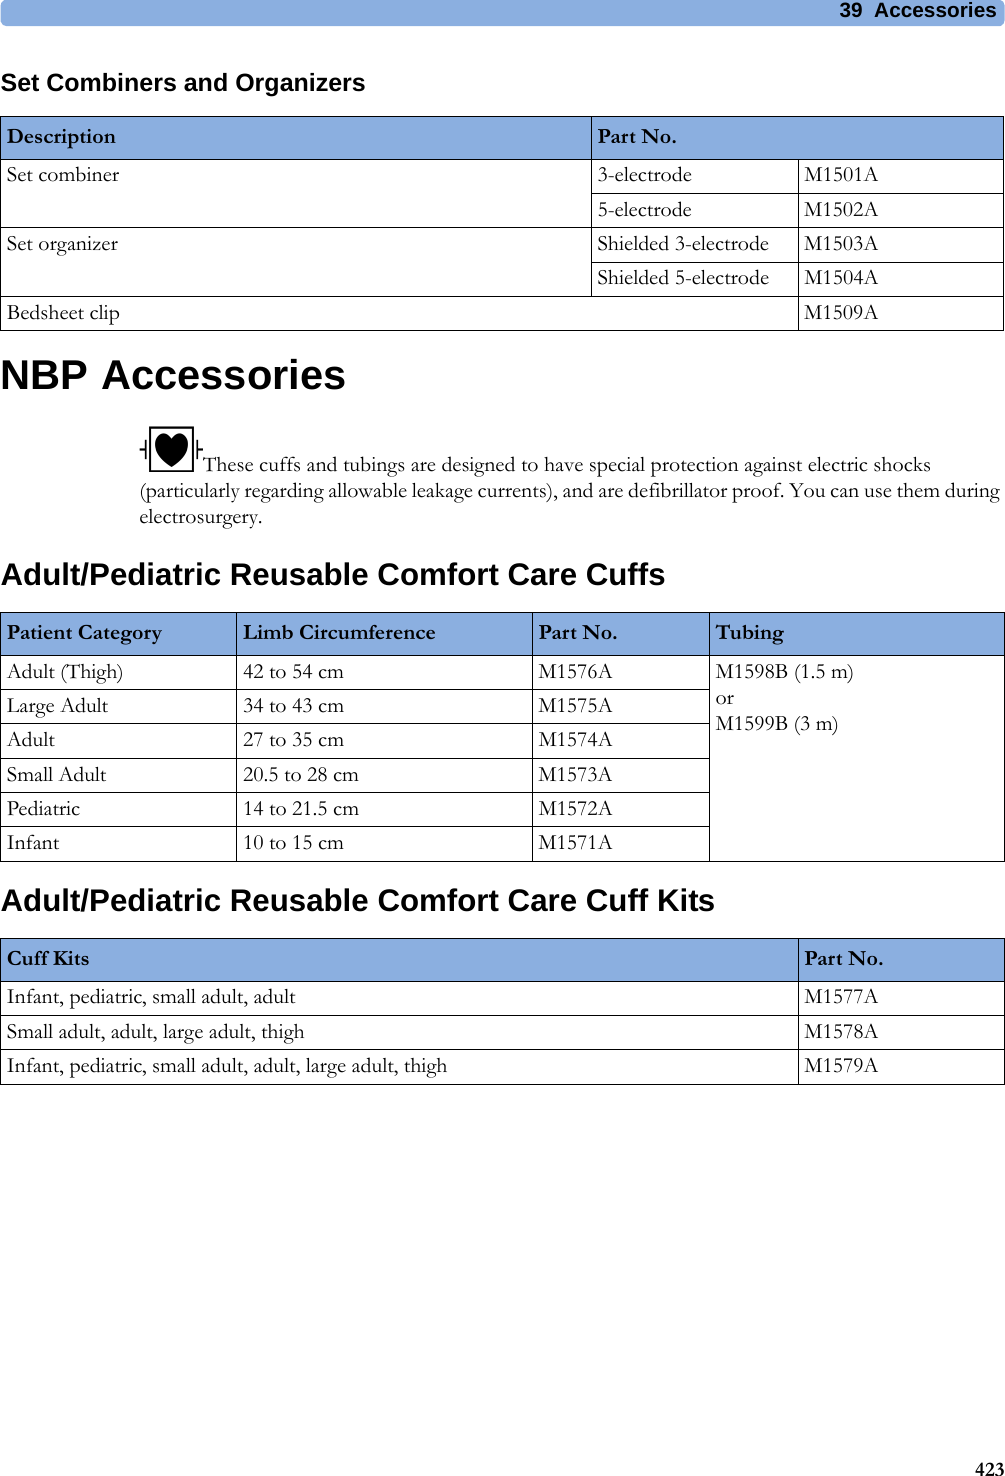 39 Accessories423Set Combiners and OrganizersNBP AccessoriesThese cuffs and tubings are designed to have special protection against electric shocks (particularly regarding allowable leakage currents), and are defibrillator proof. You can use them during electrosurgery.Adult/Pediatric Reusable Comfort Care CuffsAdult/Pediatric Reusable Comfort Care Cuff KitsDescription Part No.Set combiner 3-electrode M1501A5-electrode M1502ASet organizer Shielded 3-electrode M1503AShielded 5-electrode M1504ABedsheet clip M1509APatient Category Limb Circumference Part No. TubingAdult (Thigh) 42 to 54 cm M1576A M1598B (1.5 m) orM1599B (3 m)Large Adult 34 to 43 cm M1575AAdult 27 to 35 cm M1574ASmall Adult 20.5 to 28 cm M1573APediatric 14 to 21.5 cm M1572AInfant 10 to 15 cm M1571ACuff Kits Part No.Infant, pediatric, small adult, adult M1577ASmall adult, adult, large adult, thigh M1578AInfant, pediatric, small adult, adult, large adult, thigh M1579A